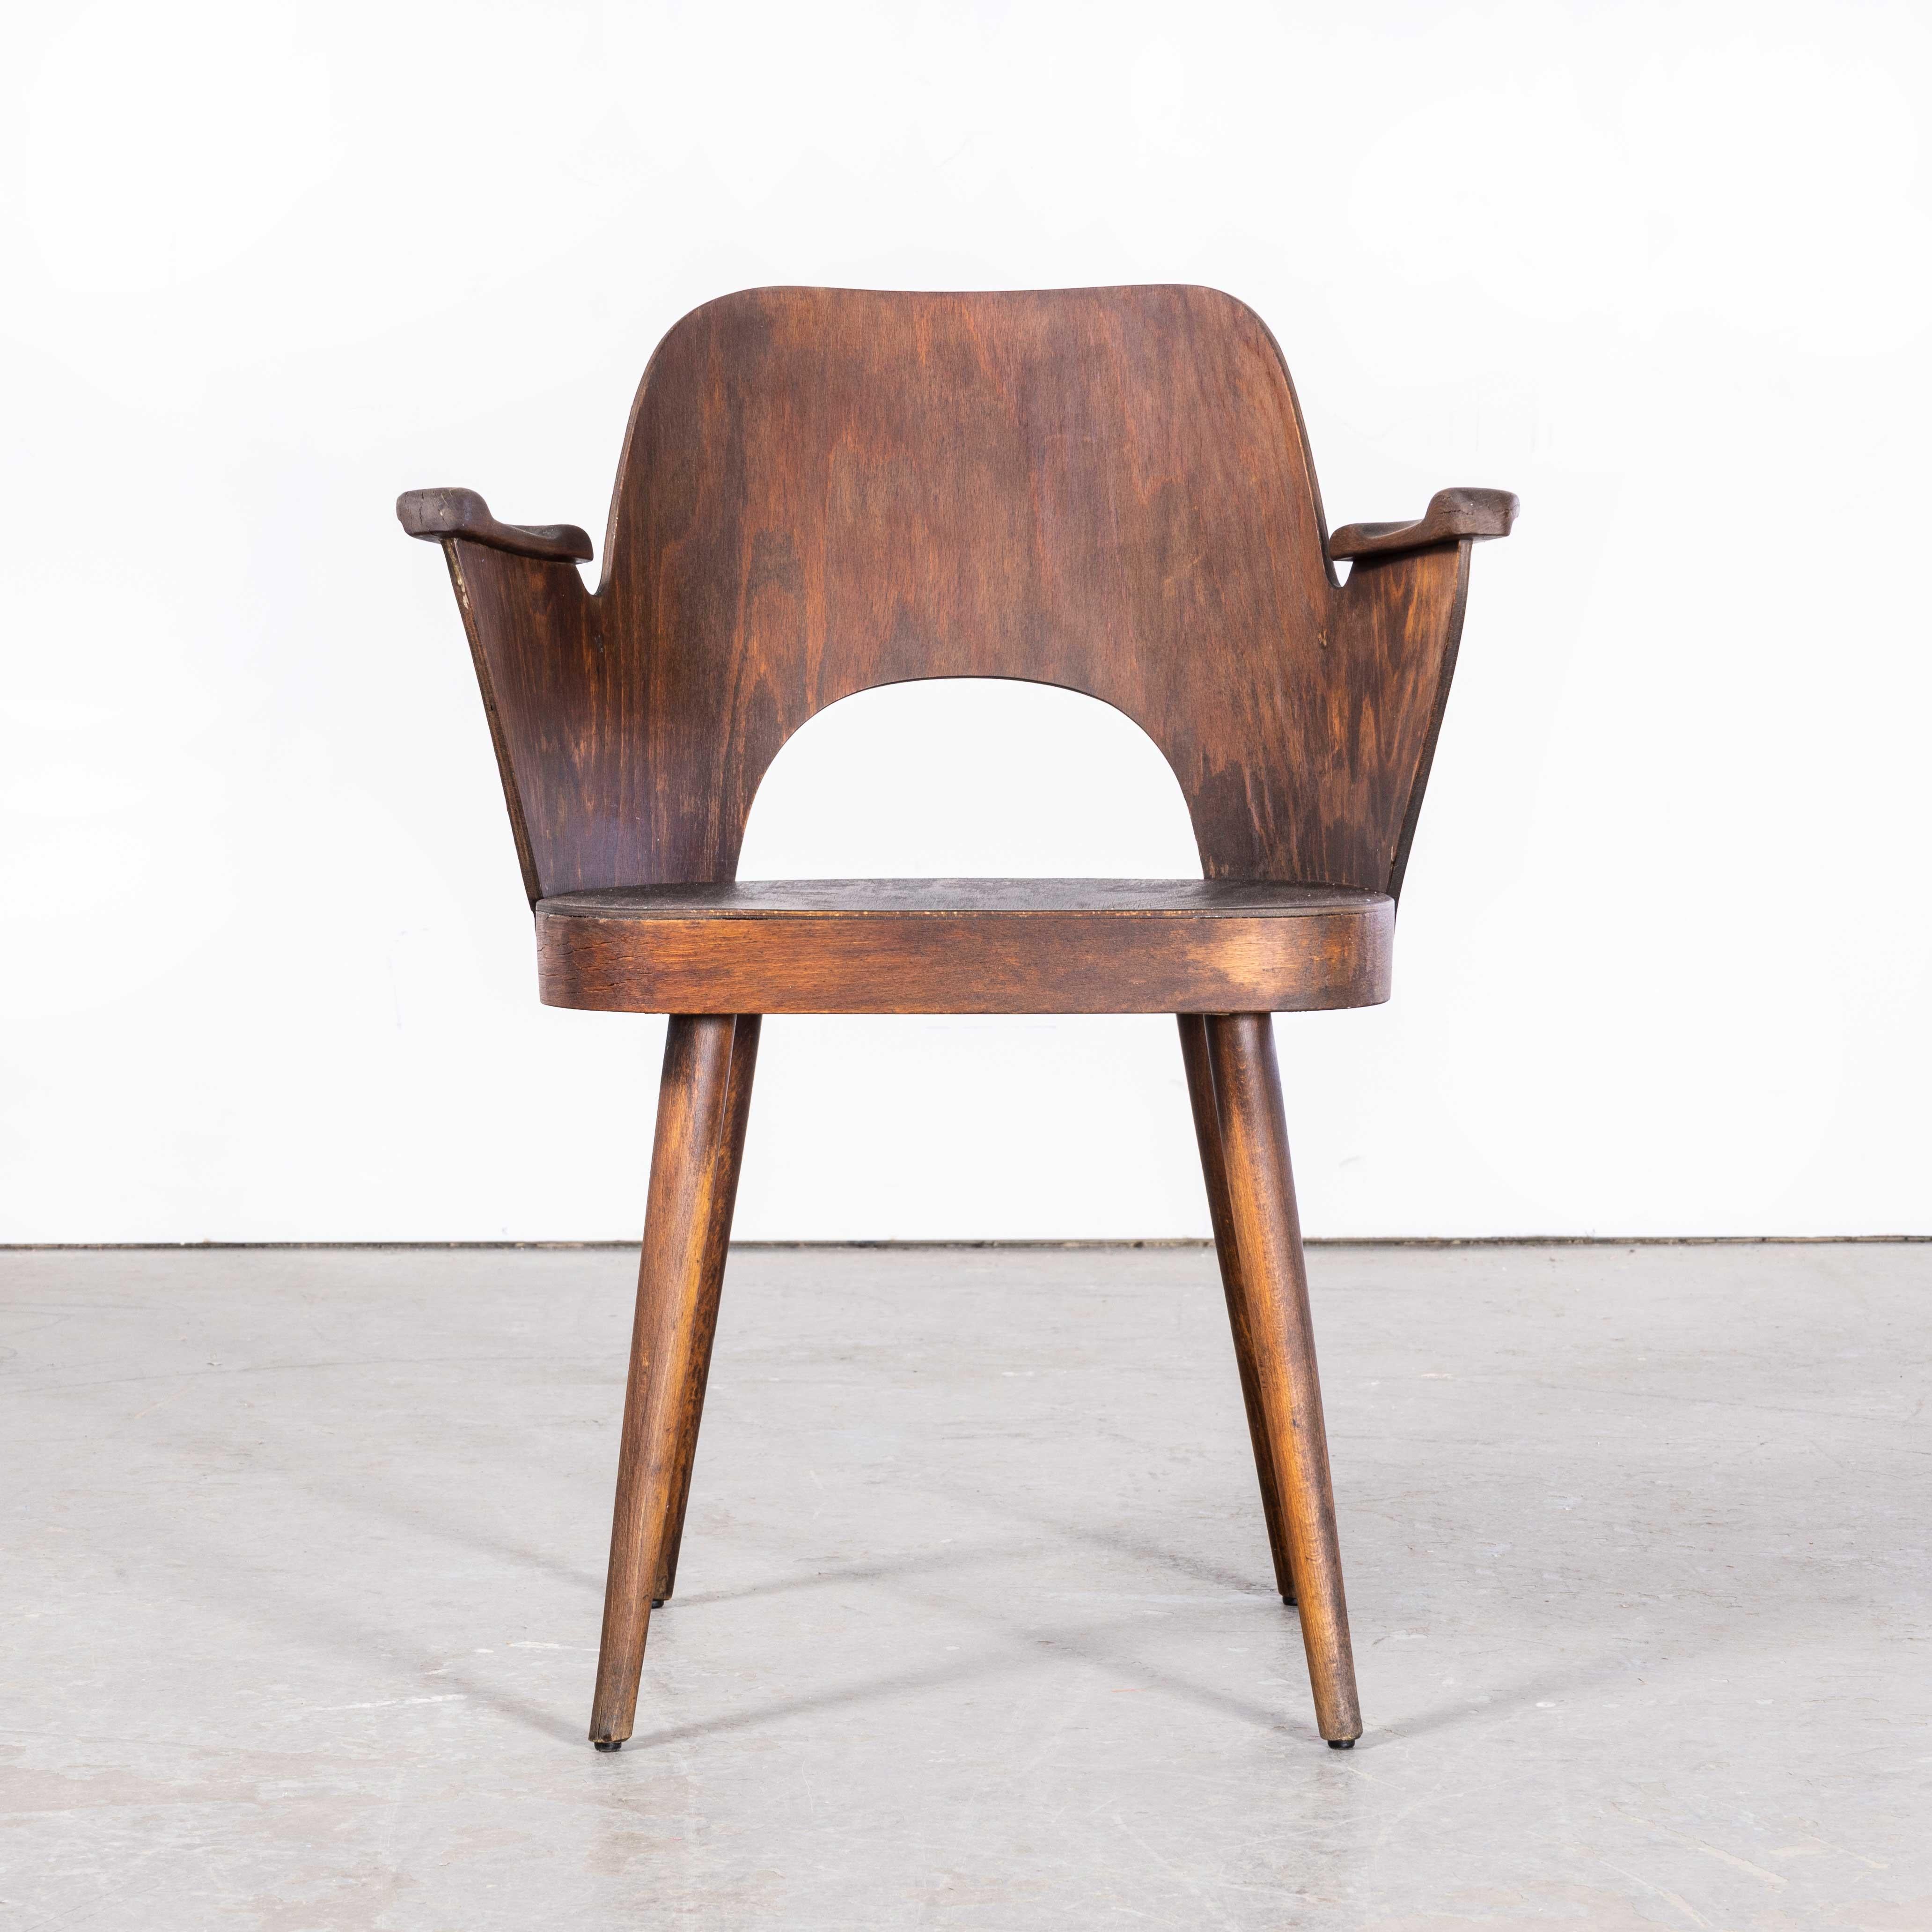 1950’s Mid Oak Original Arm Chair – Oswald Haerdtl Model 515
1950’s Mid Oak Original Arm Chair – Oswald Haerdtl Model 515. This chairs was produced by the famous Czech firm Ton, still trading today and producing beautiful furniture, they are an